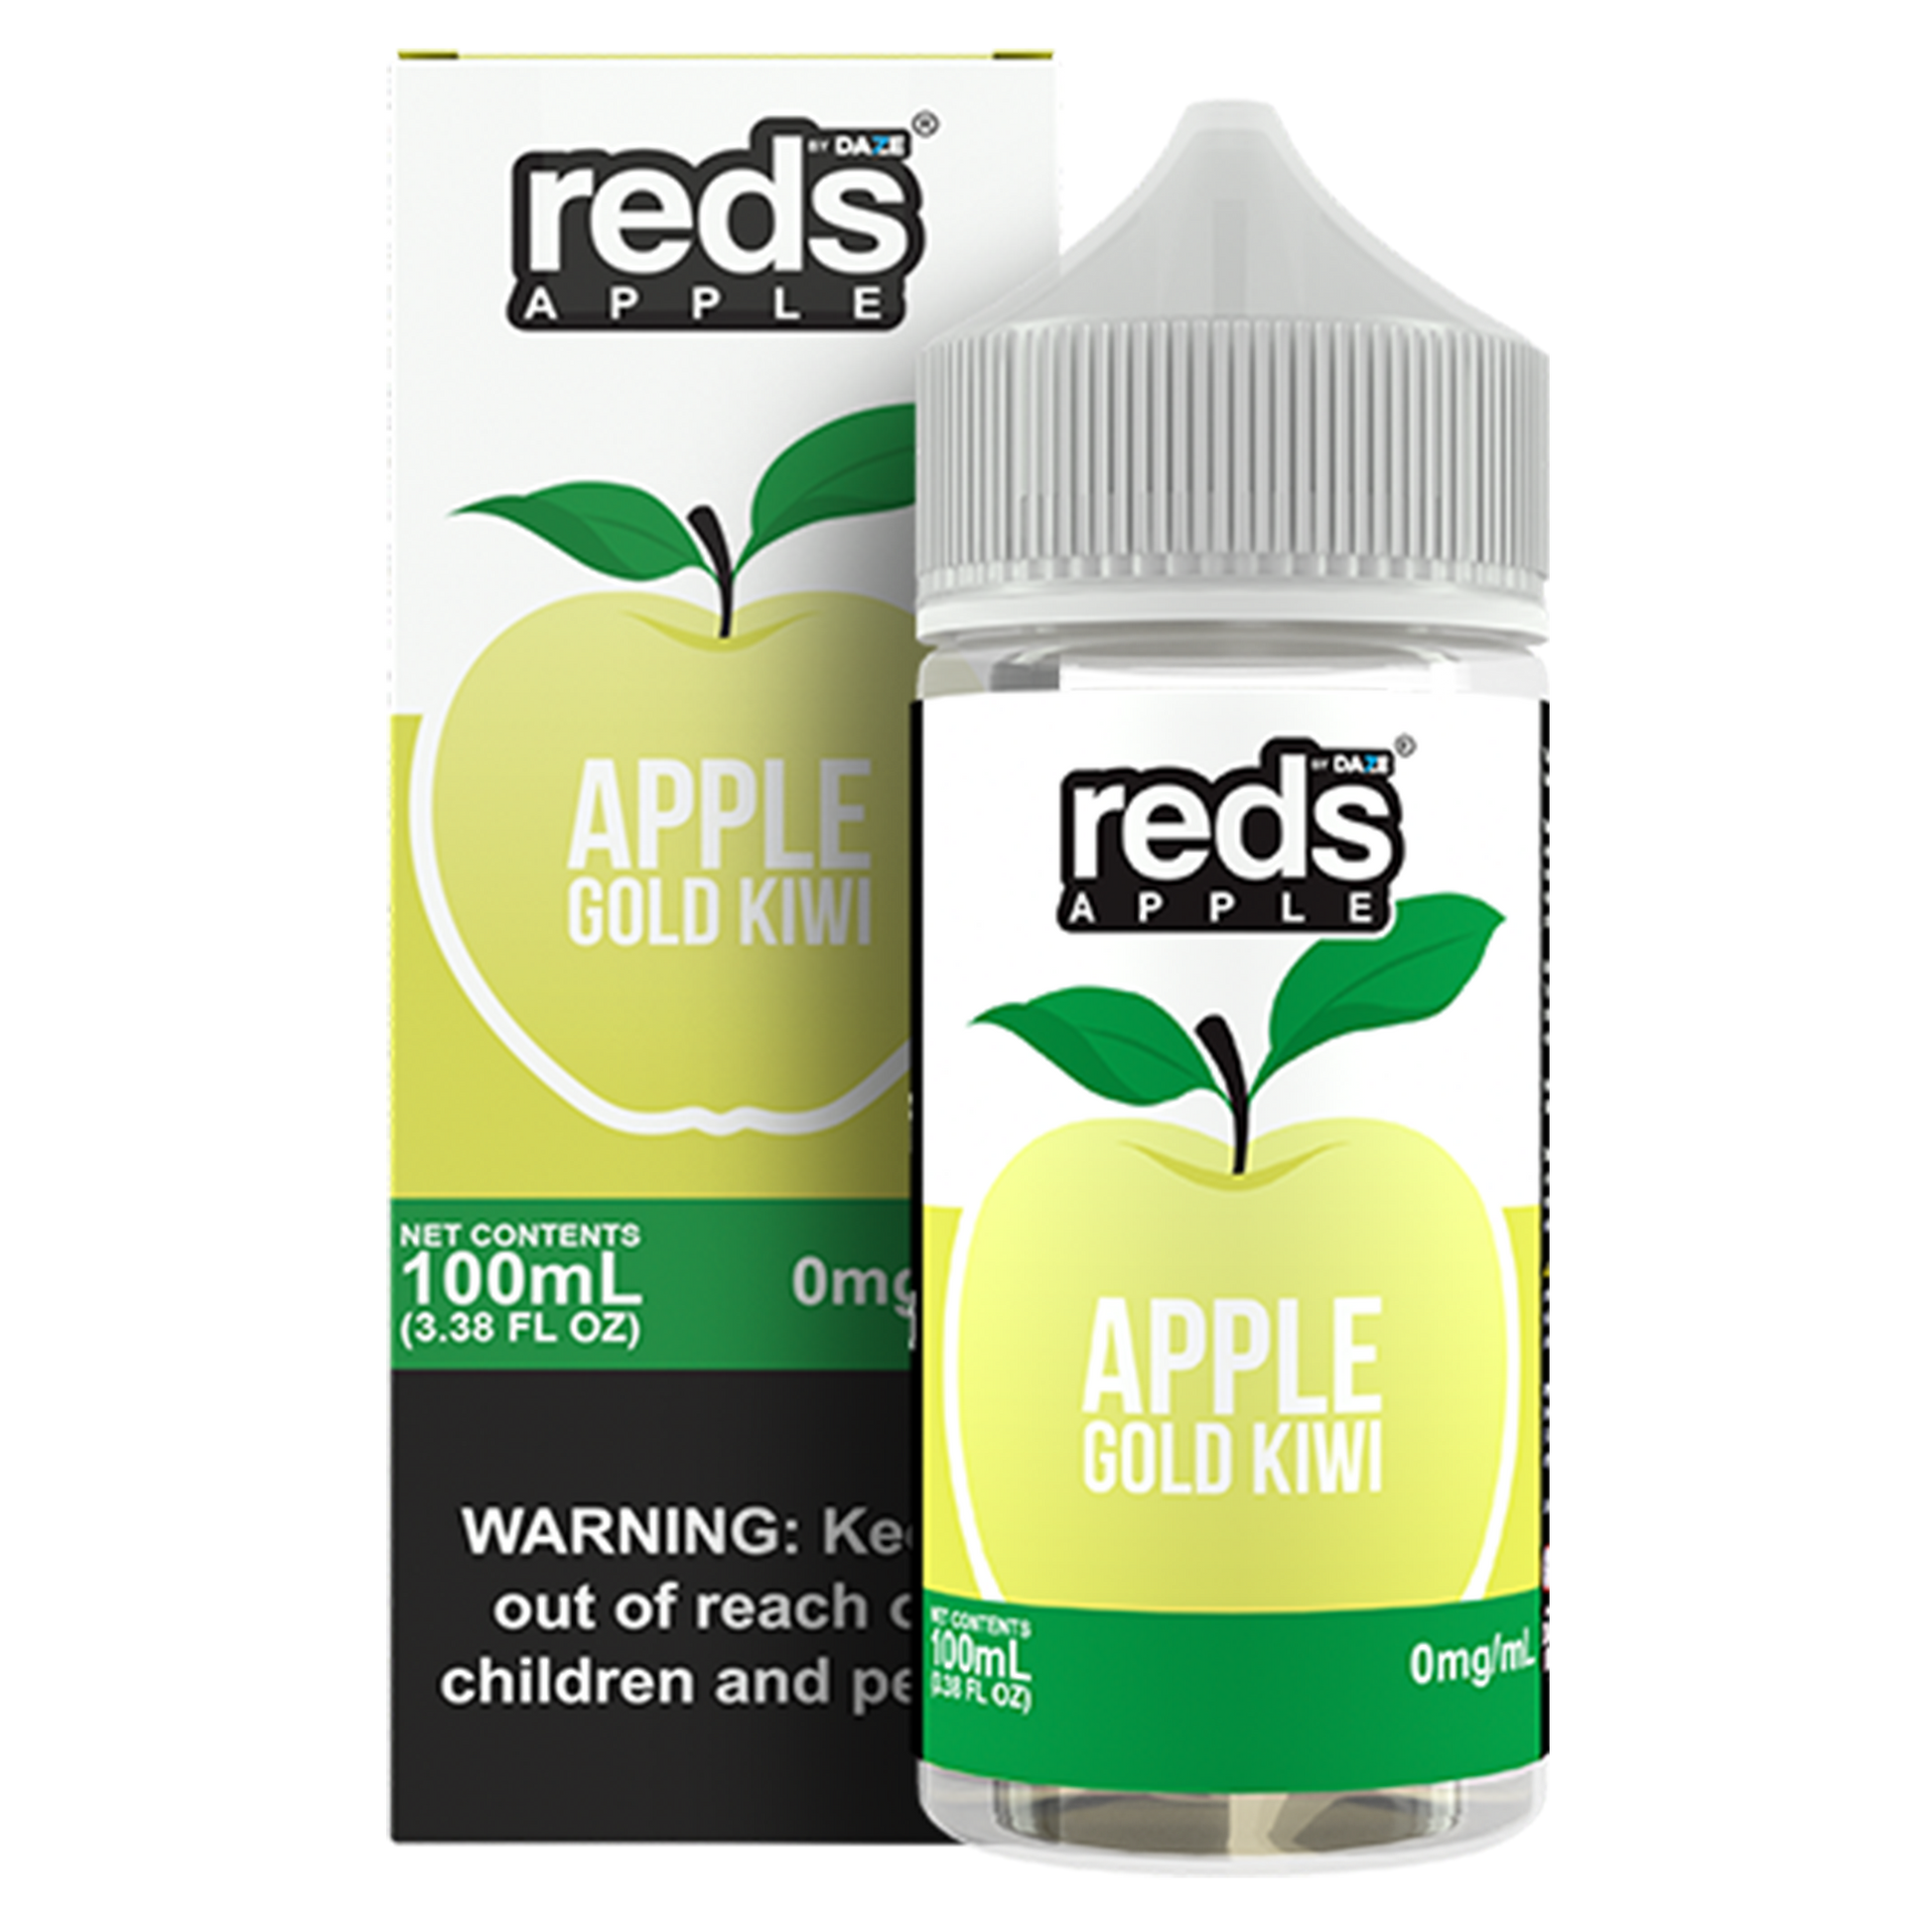 Gold Kiwi by 7Daze Reds 100mL 0mg bottle with Packaging